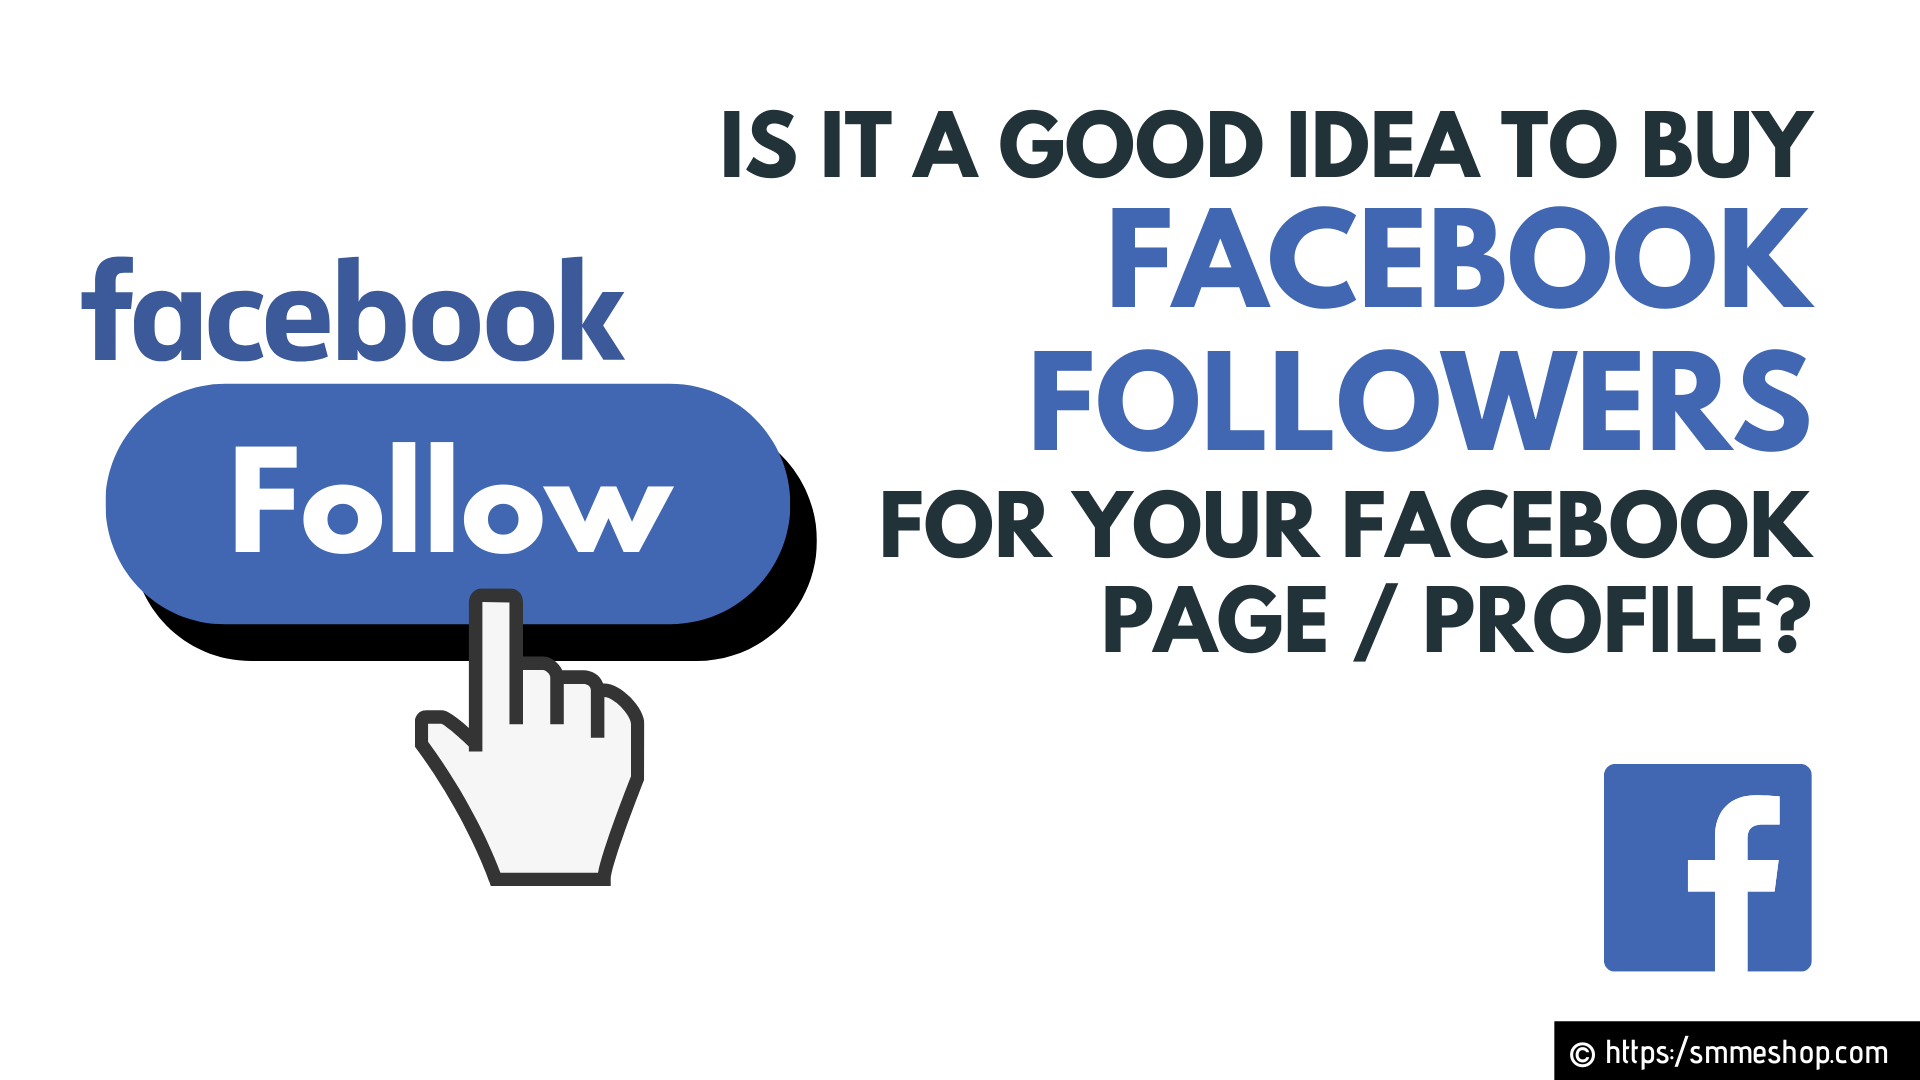 Is it a Good Idea to Buy Facebook Followers for your Facebook Page / Profile?